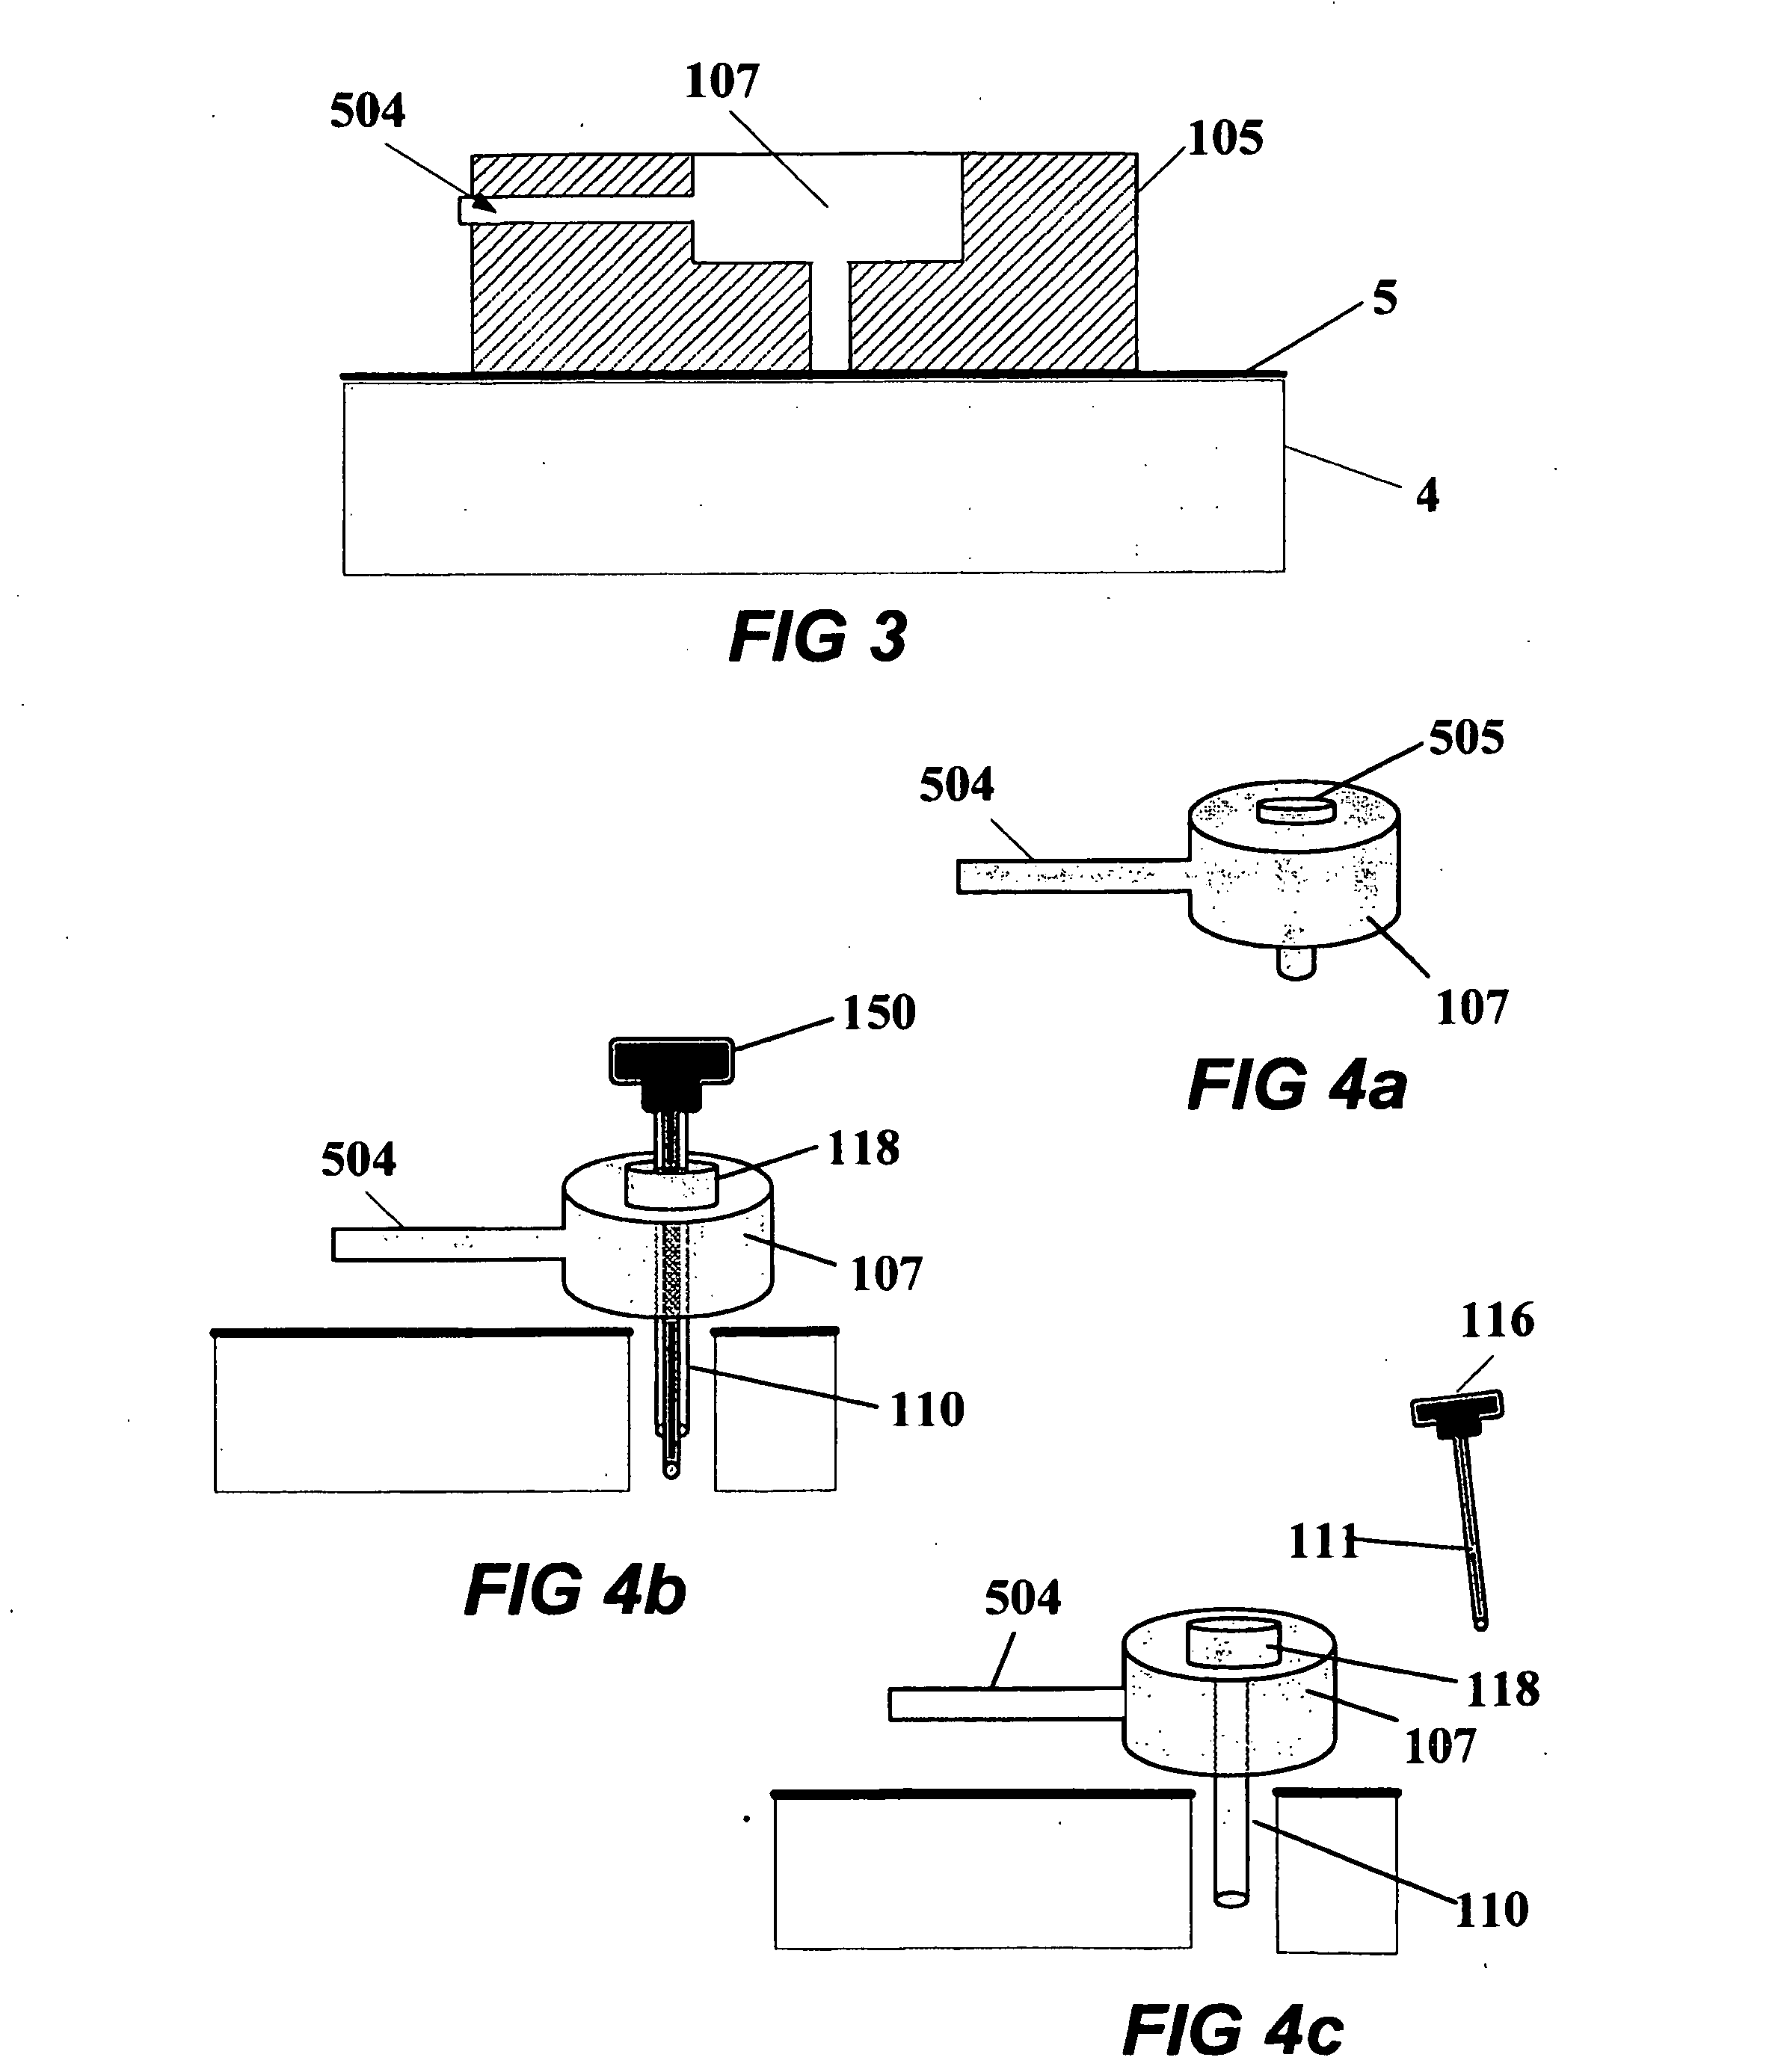 Insertion device and method for inserting a subcutaneously insertable element into body